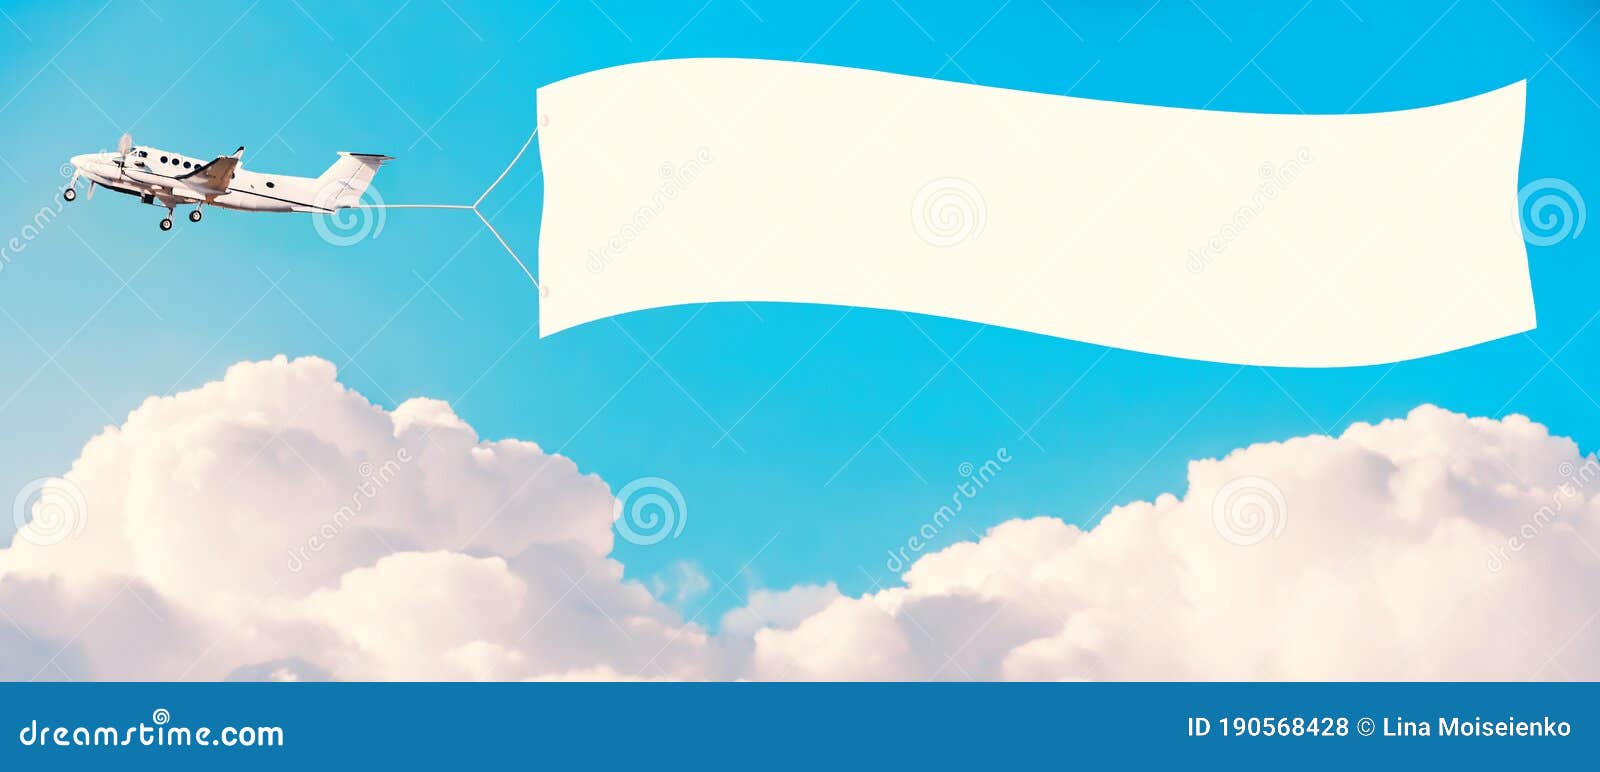 Download Plane With White Banner Stock Photo Image Of Message 190568428 PSD Mockup Templates